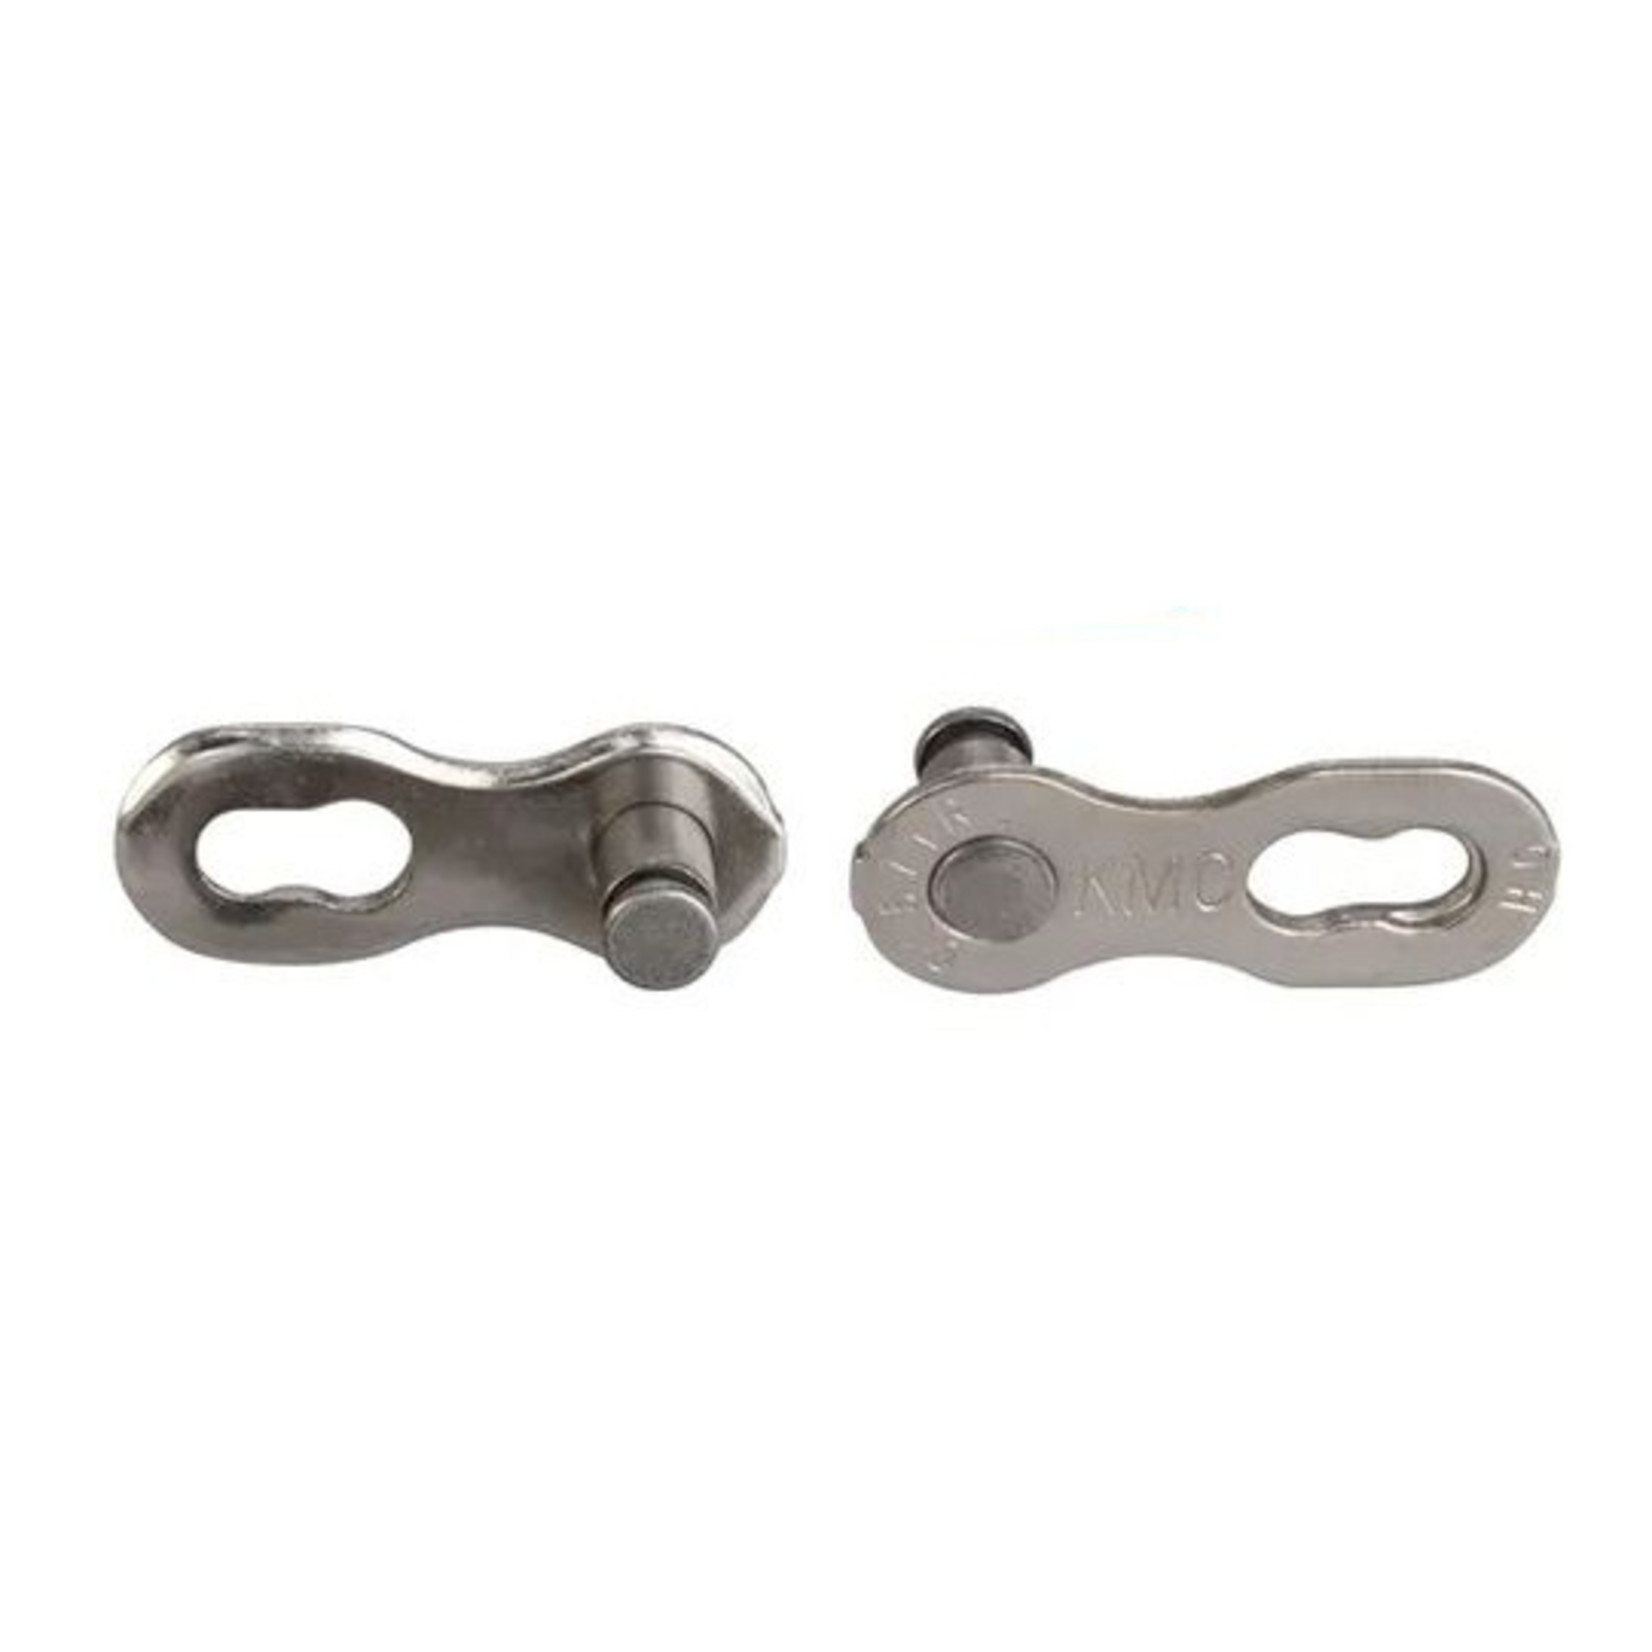 KMC KMC Bike Connecting Chain Links - 7/8 Speed - Card of 2 Fits All 7.1mm - Silver